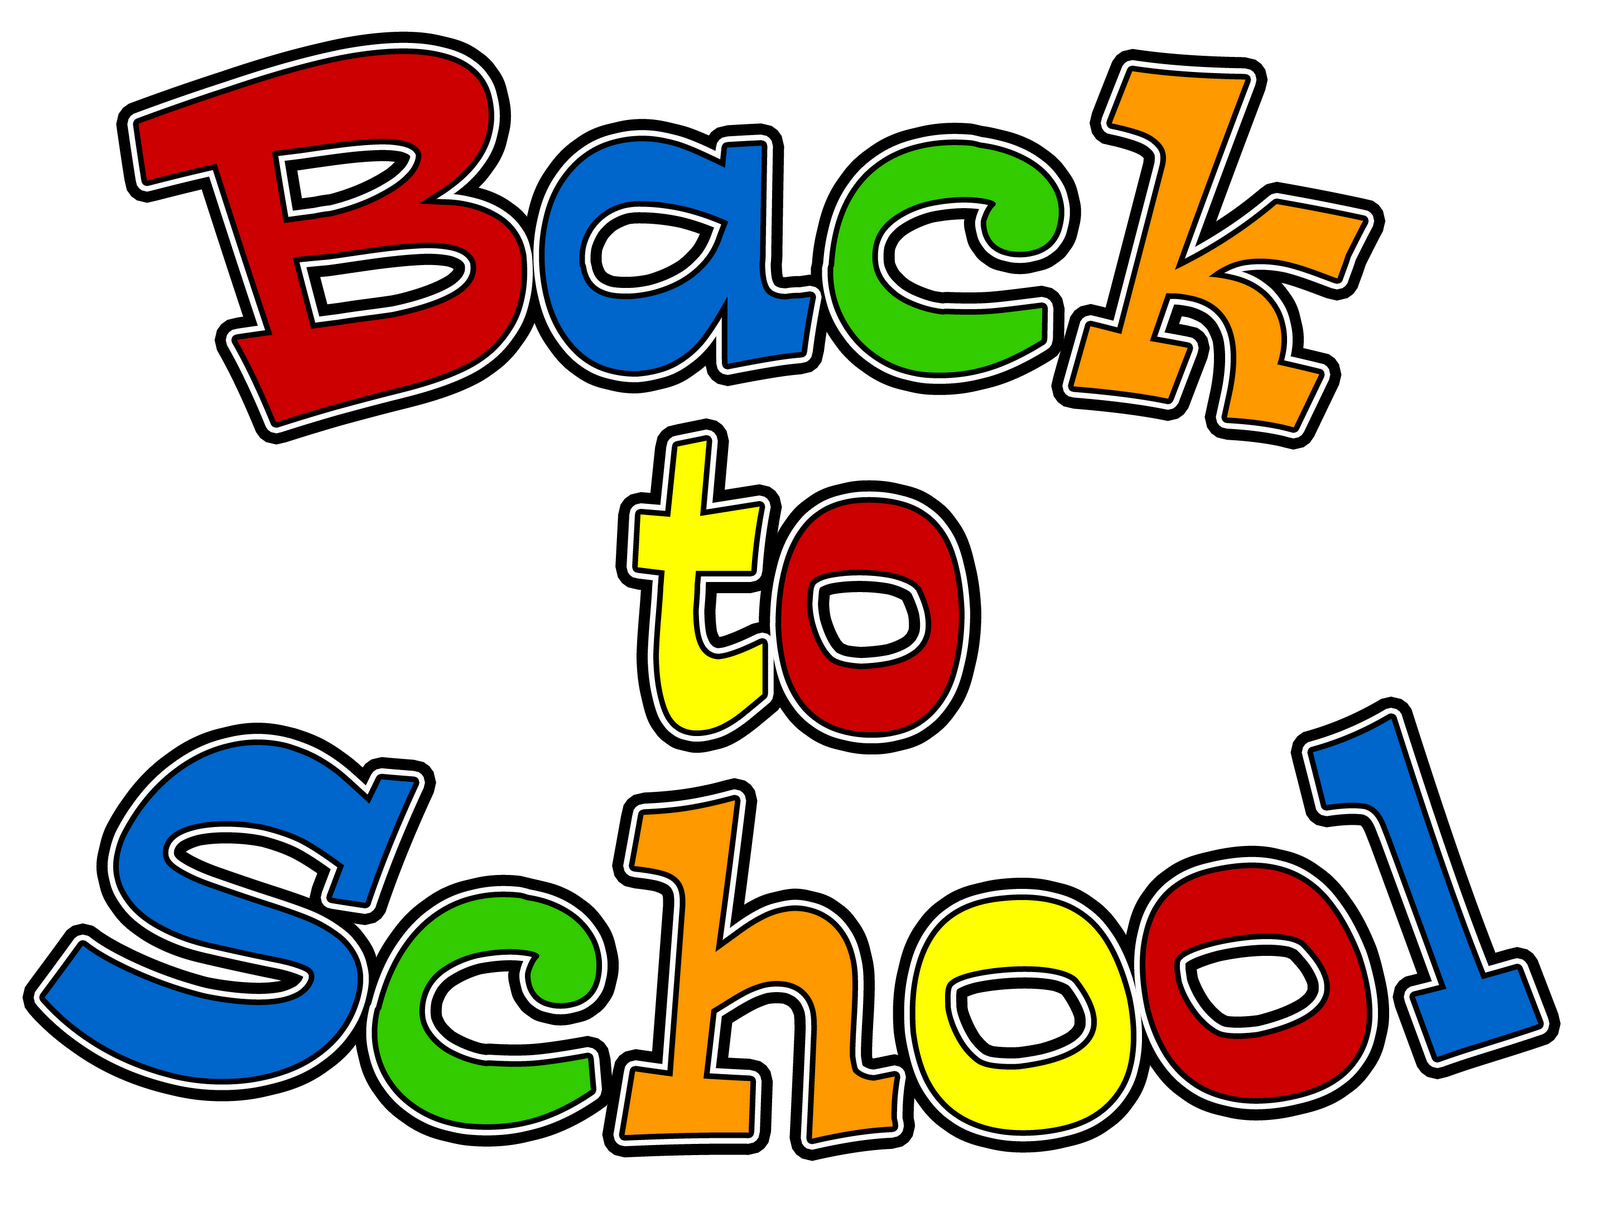 Welcome back to school clip art clipart clipartcow - Cliparting.com